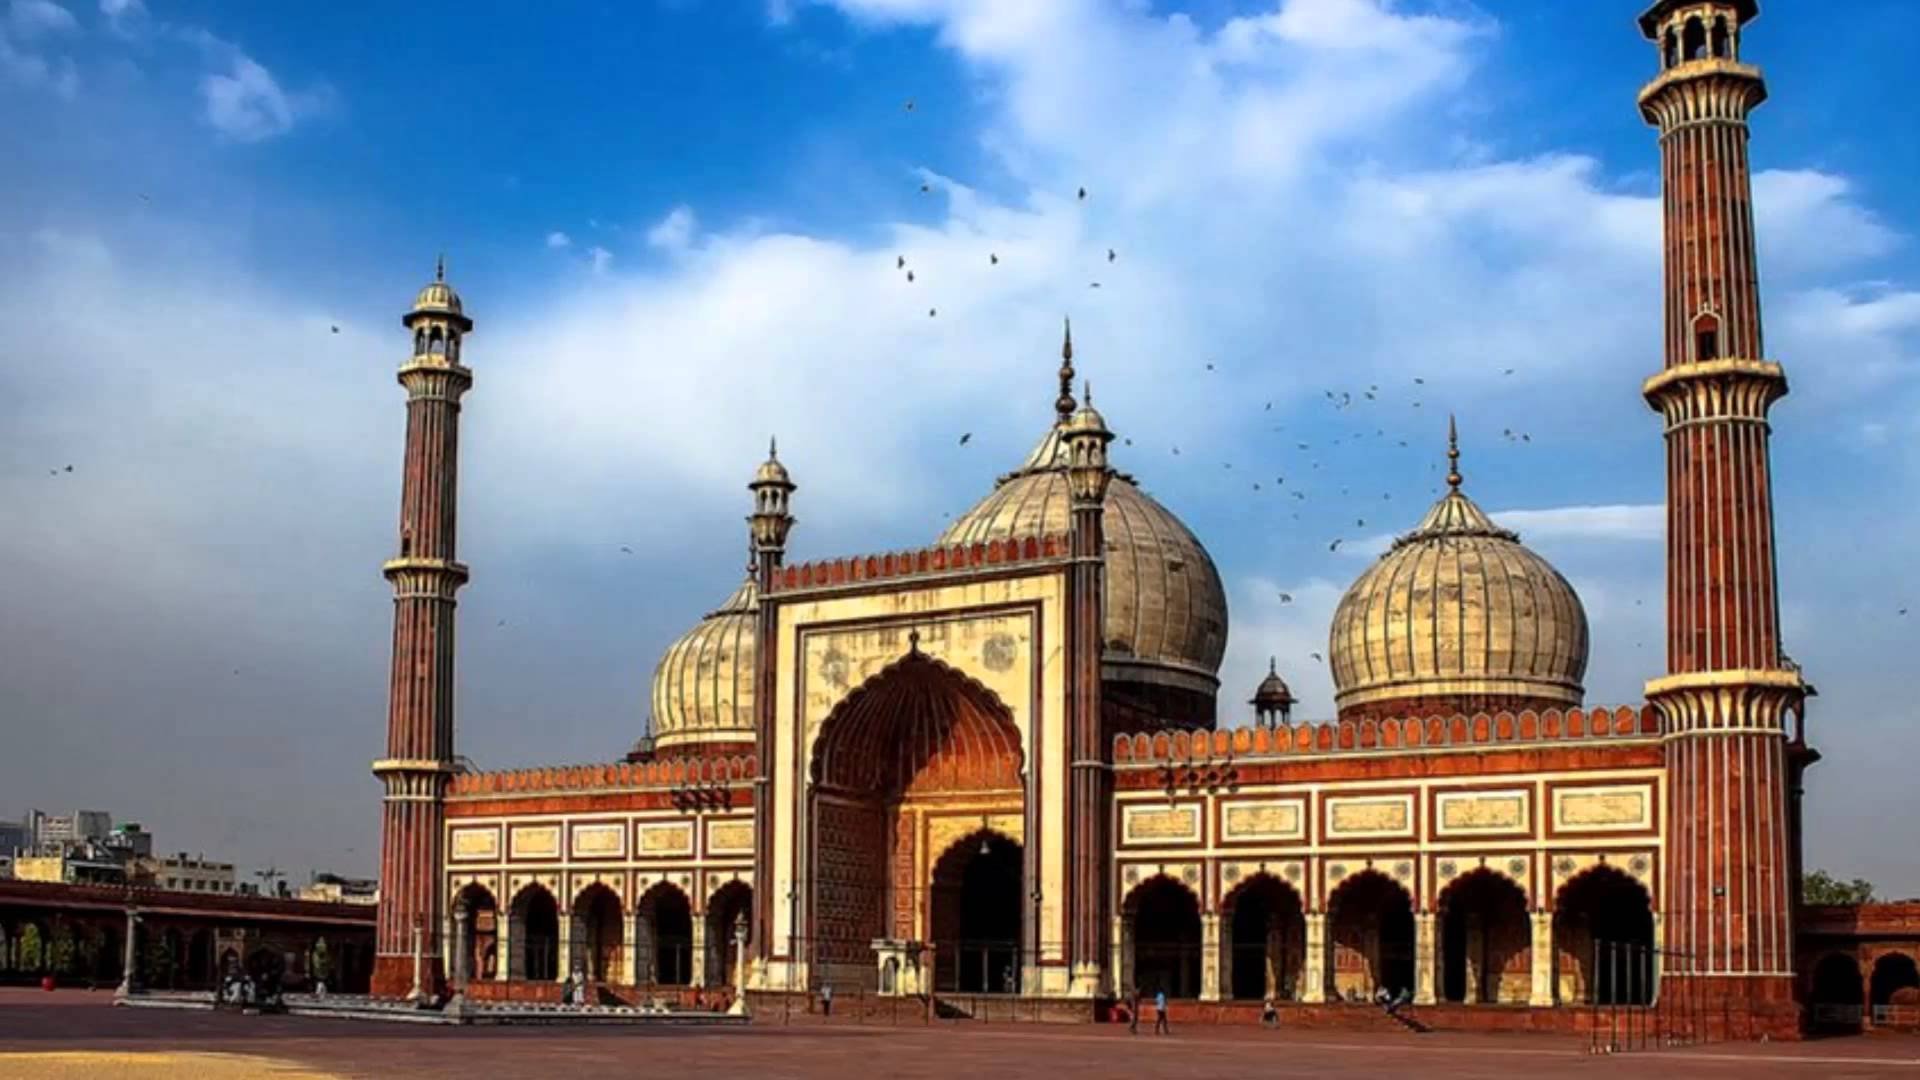 Jama Masjid Islamic Holy Place in Delhi | Details Of Temples